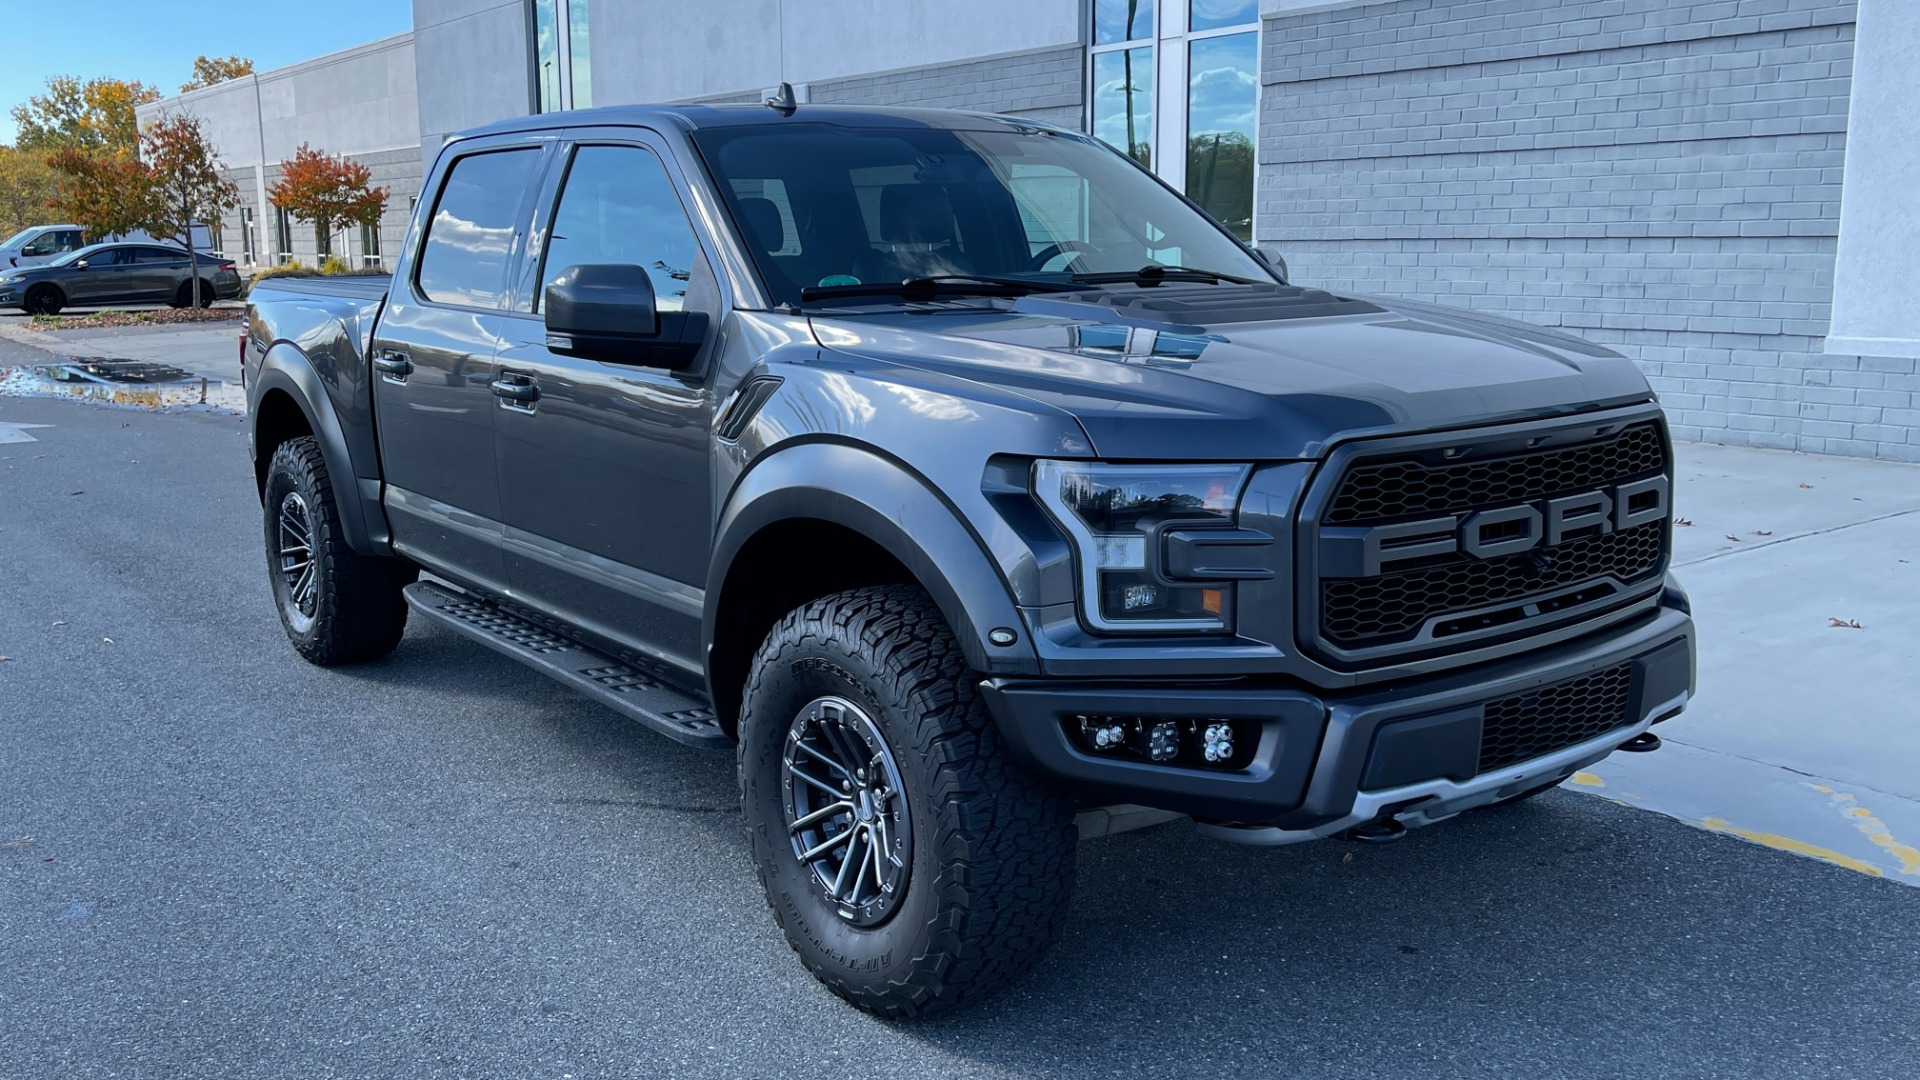 Used 2019 Ford F-150 RAPTOR / 802A PACKAGE / LIGHT PODS / CARBON FIBER / PANORAMIC ROOF for sale Sold at Formula Imports in Charlotte NC 28227 5